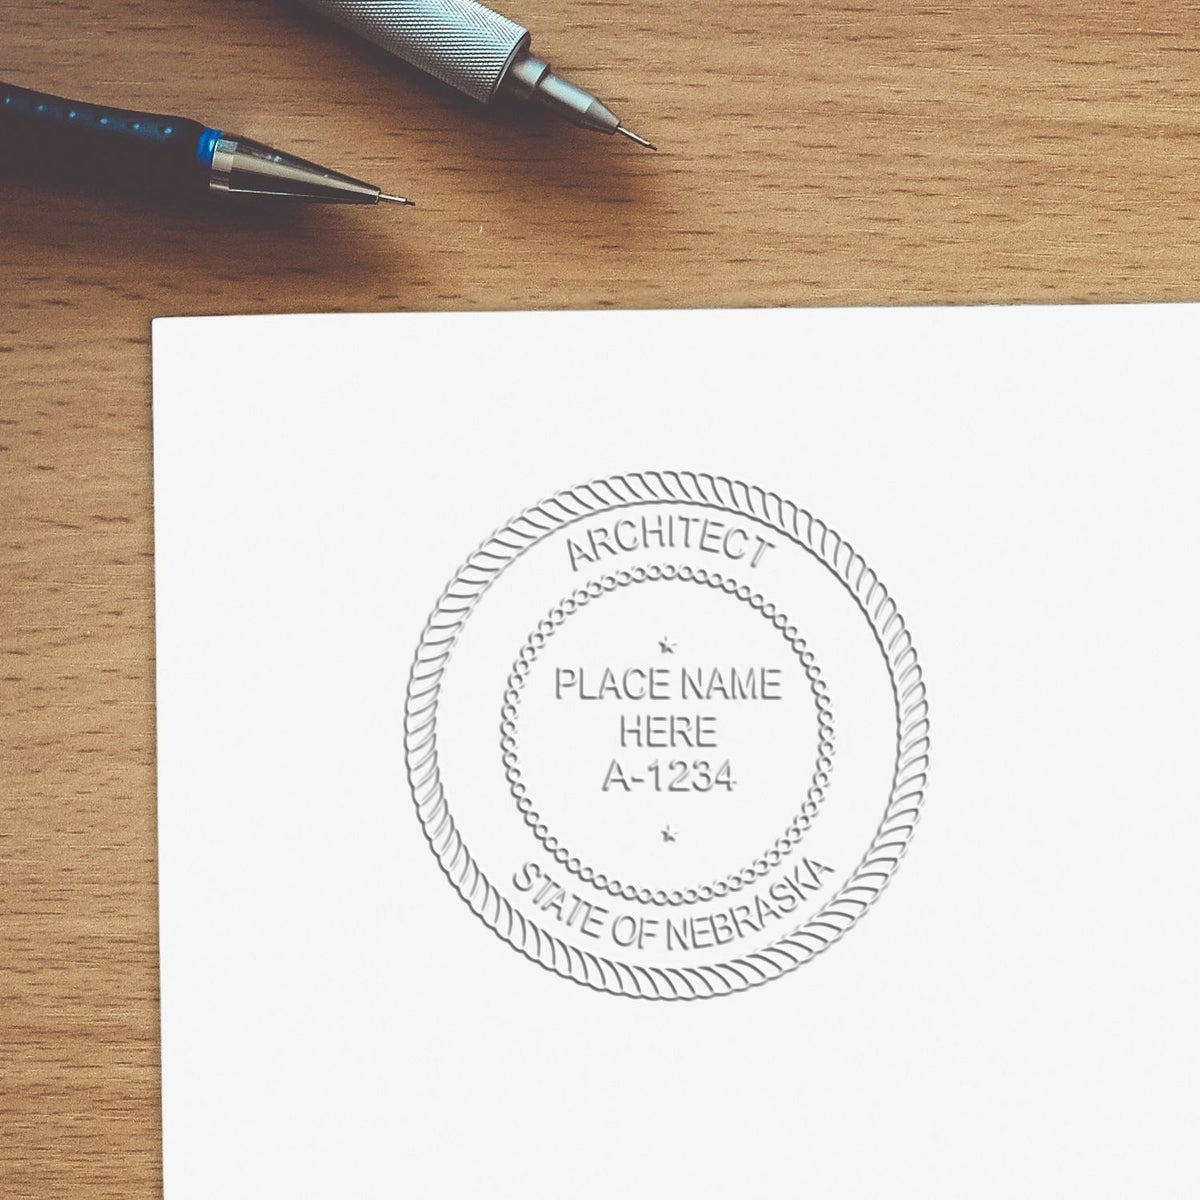 The Nebraska Desk Architect Embossing Seal stamp impression comes to life with a crisp, detailed photo on paper - showcasing true professional quality.